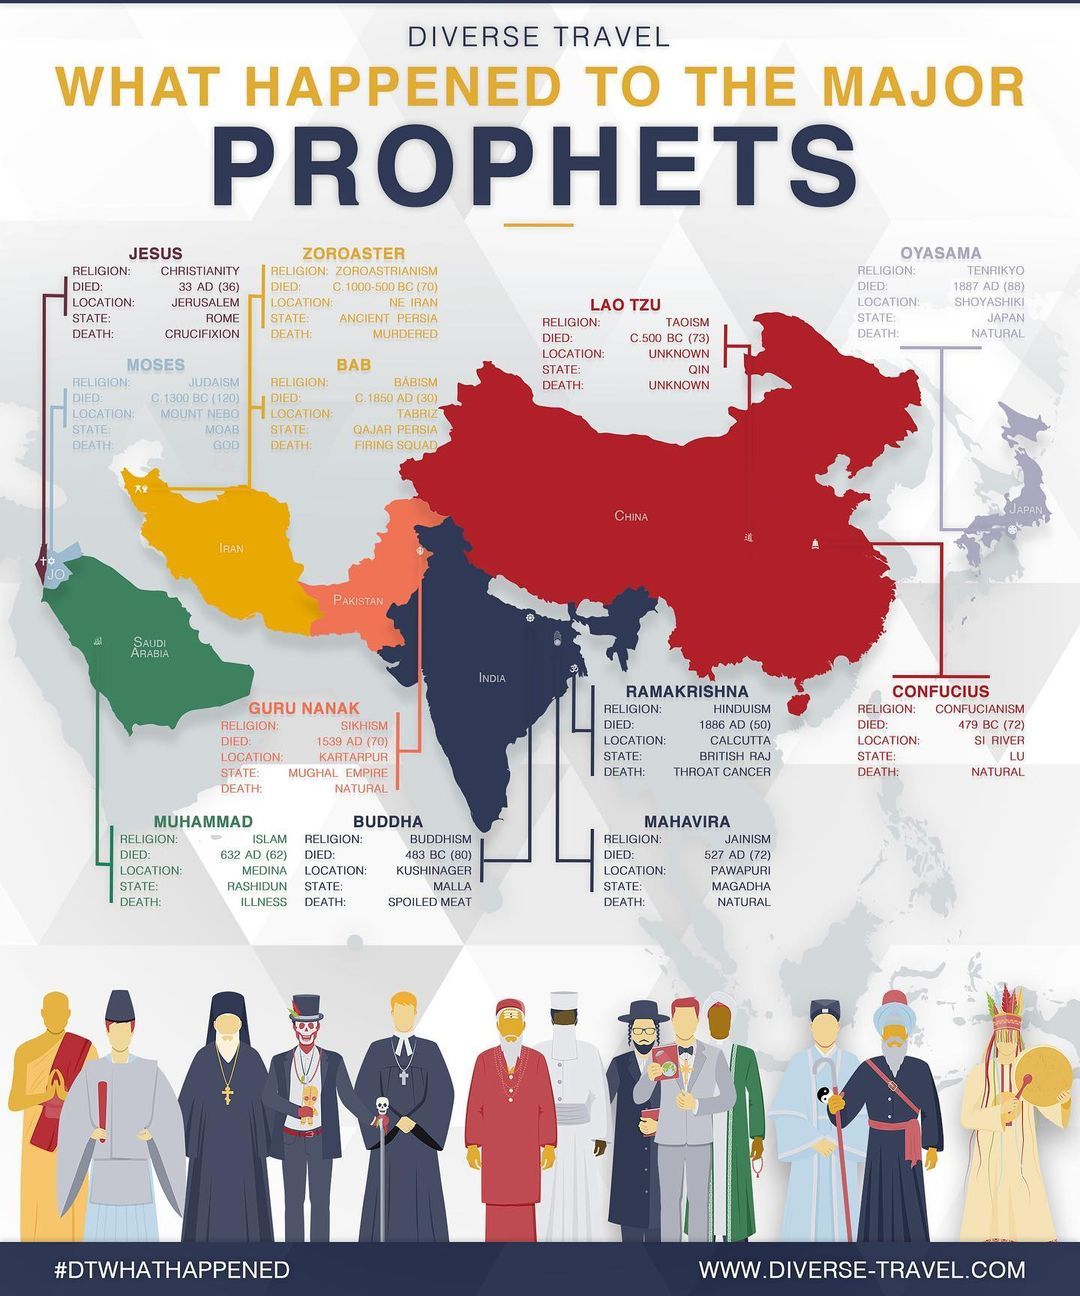 An infographic showing the fates of major religious prophets